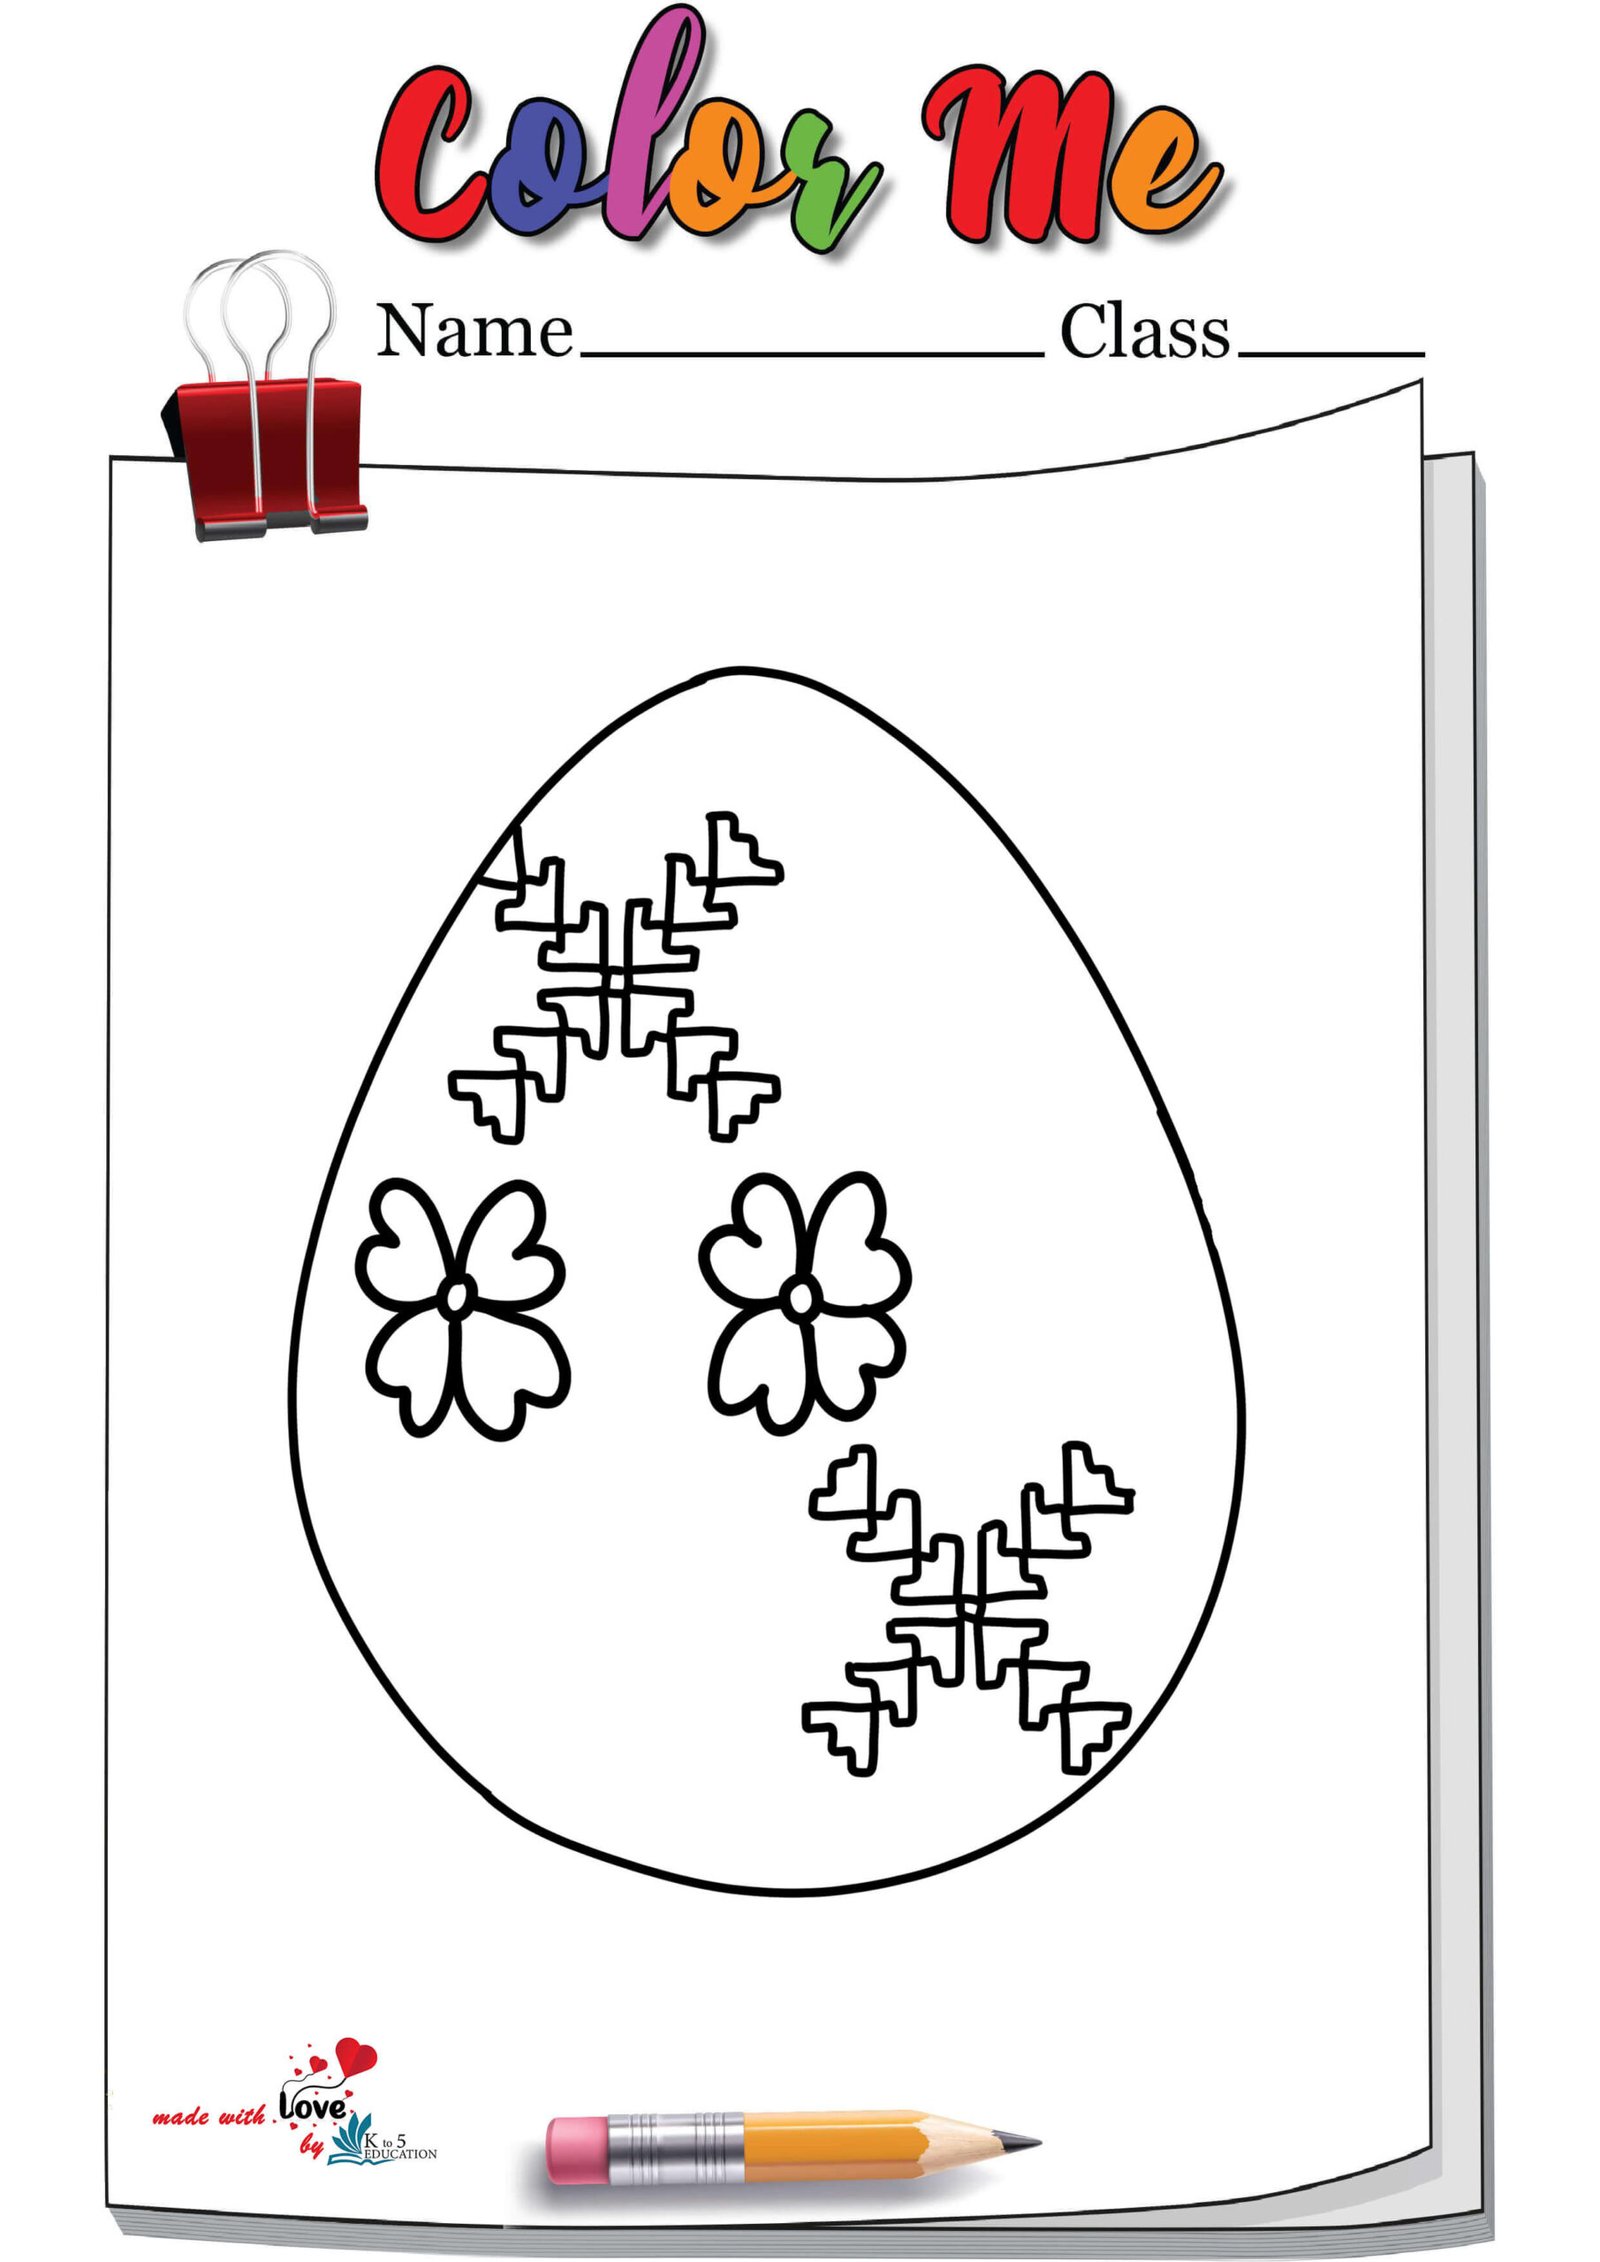 Easter Egg Set In Paper Cut Style Coloring Page